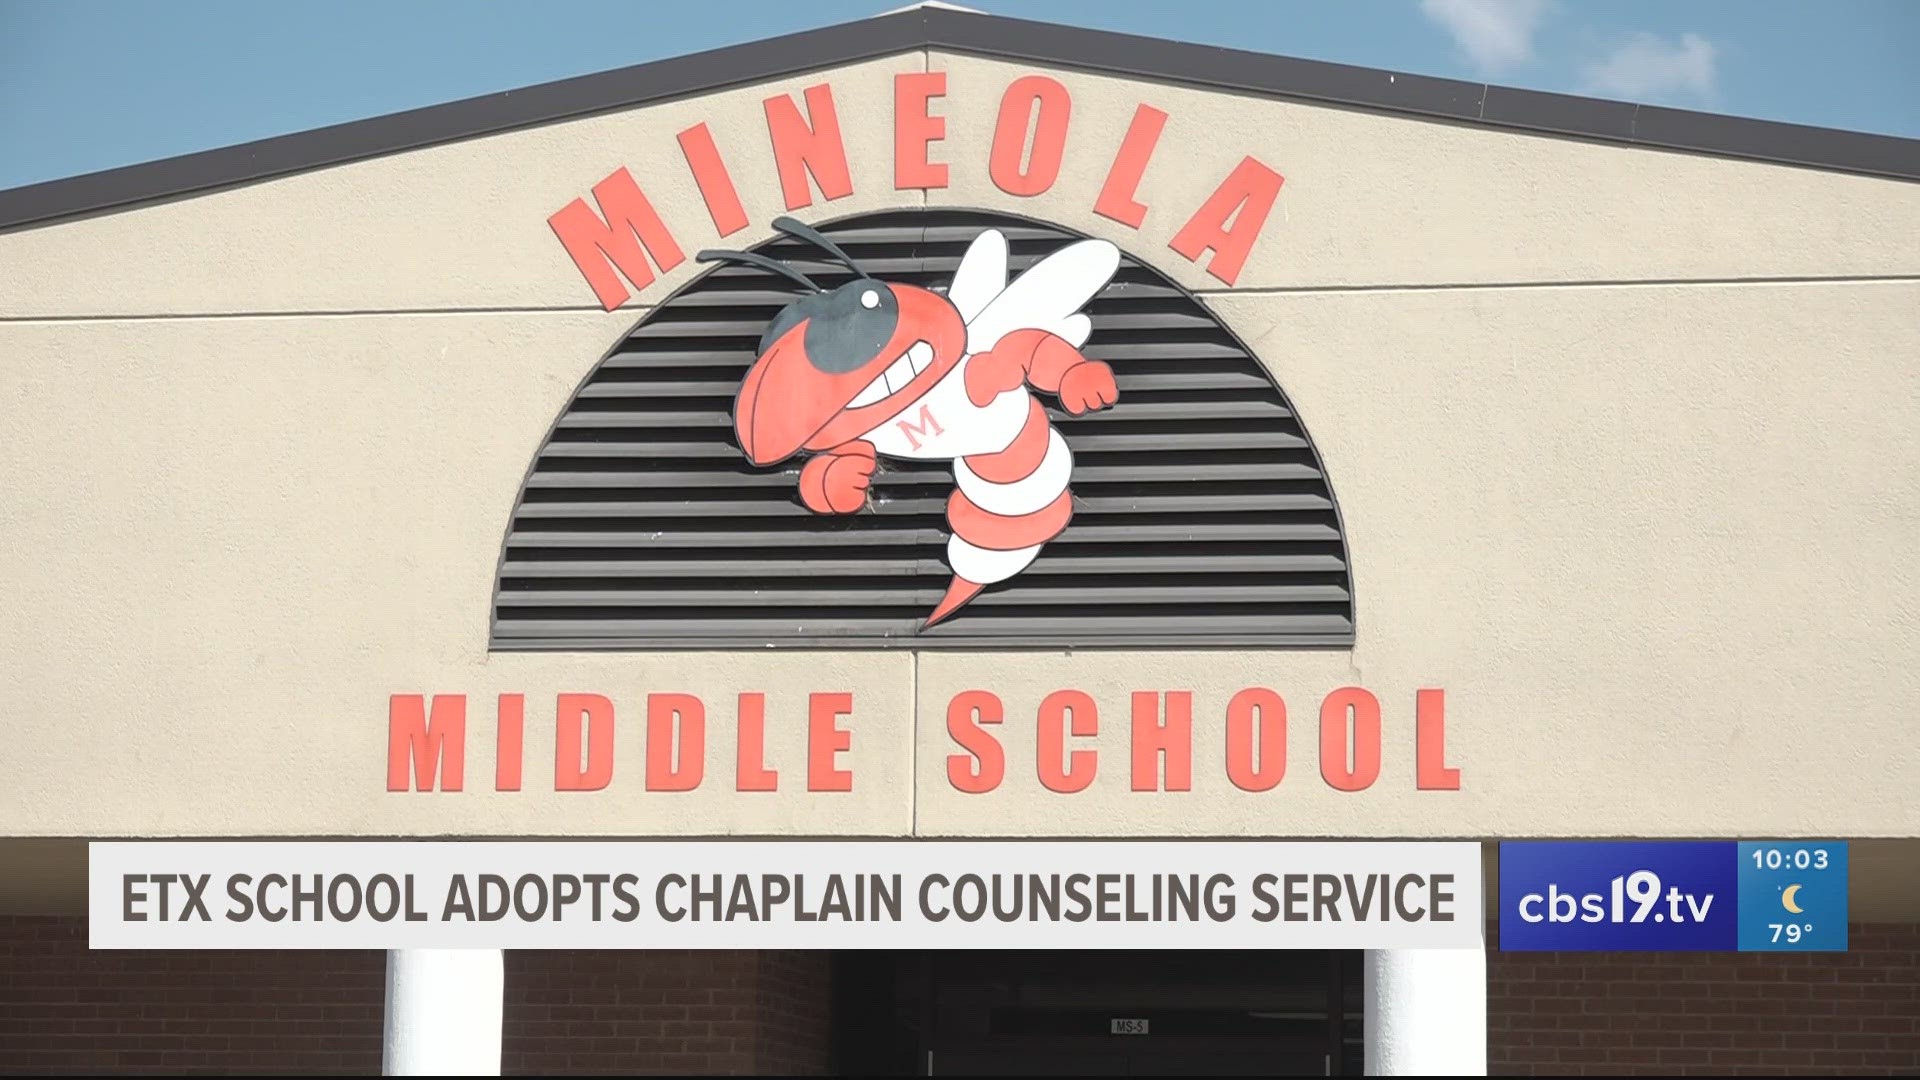 Mineola ISD is utilizing Senate Bill 763 which allows public schools to employ or accept volunteer religious chaplains to work in mental health roles.